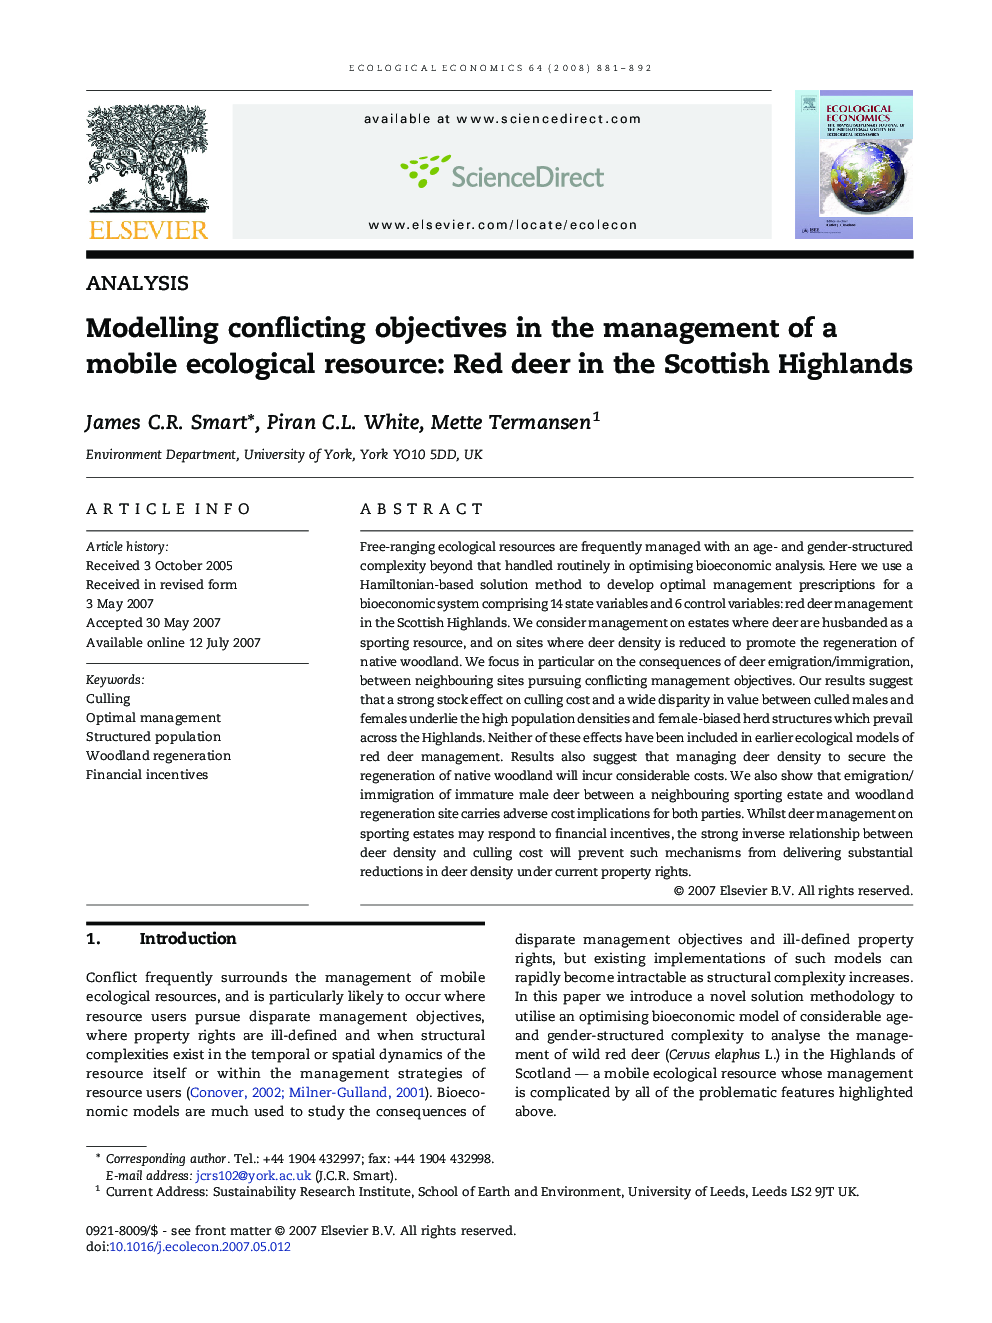 Modelling conflicting objectives in the management of a mobile ecological resource: Red deer in the Scottish Highlands